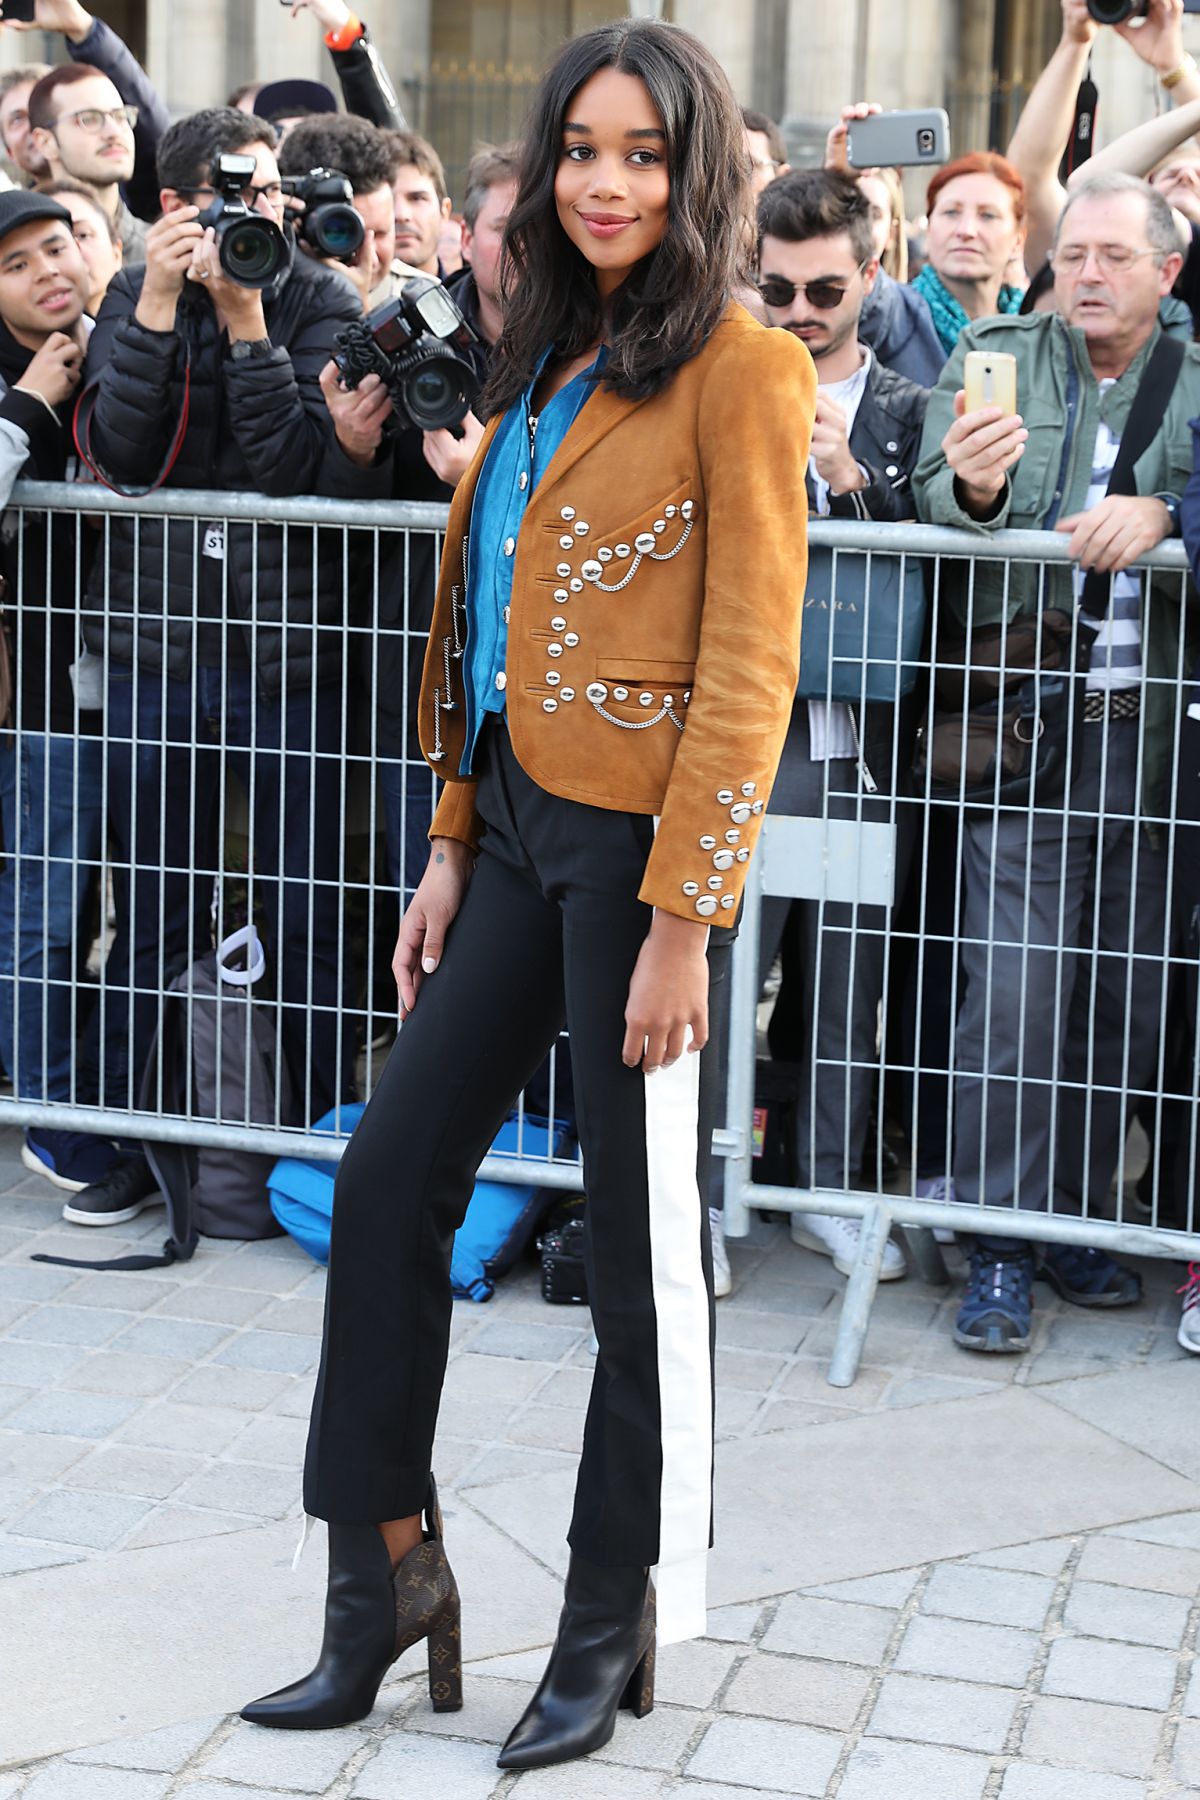 Laura Harrier Louis Vuitton Fashion Show October 3, 2017 – Star Style